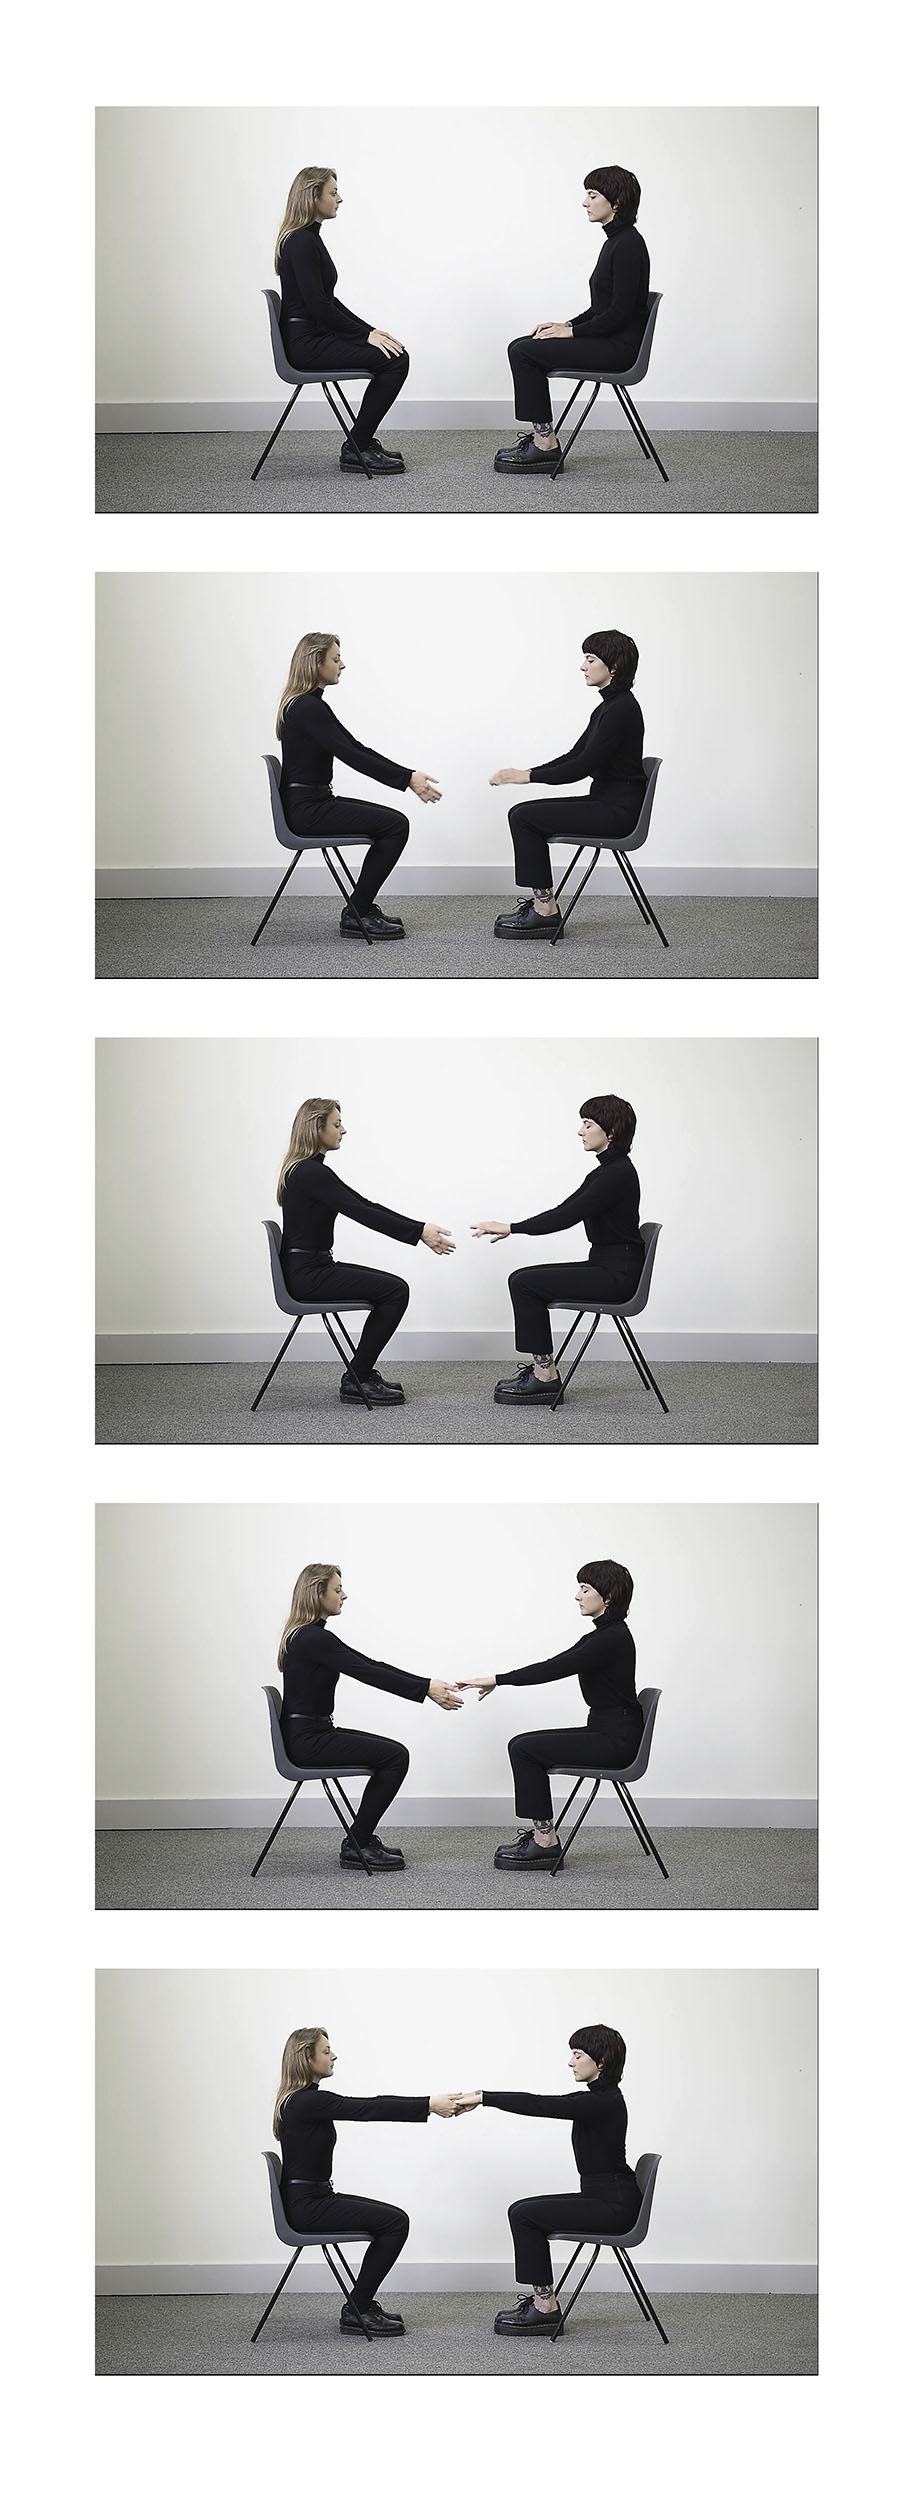 MA Photography work by Hannah Gooding showing images of two people sat opposite each other on plastic chairs.